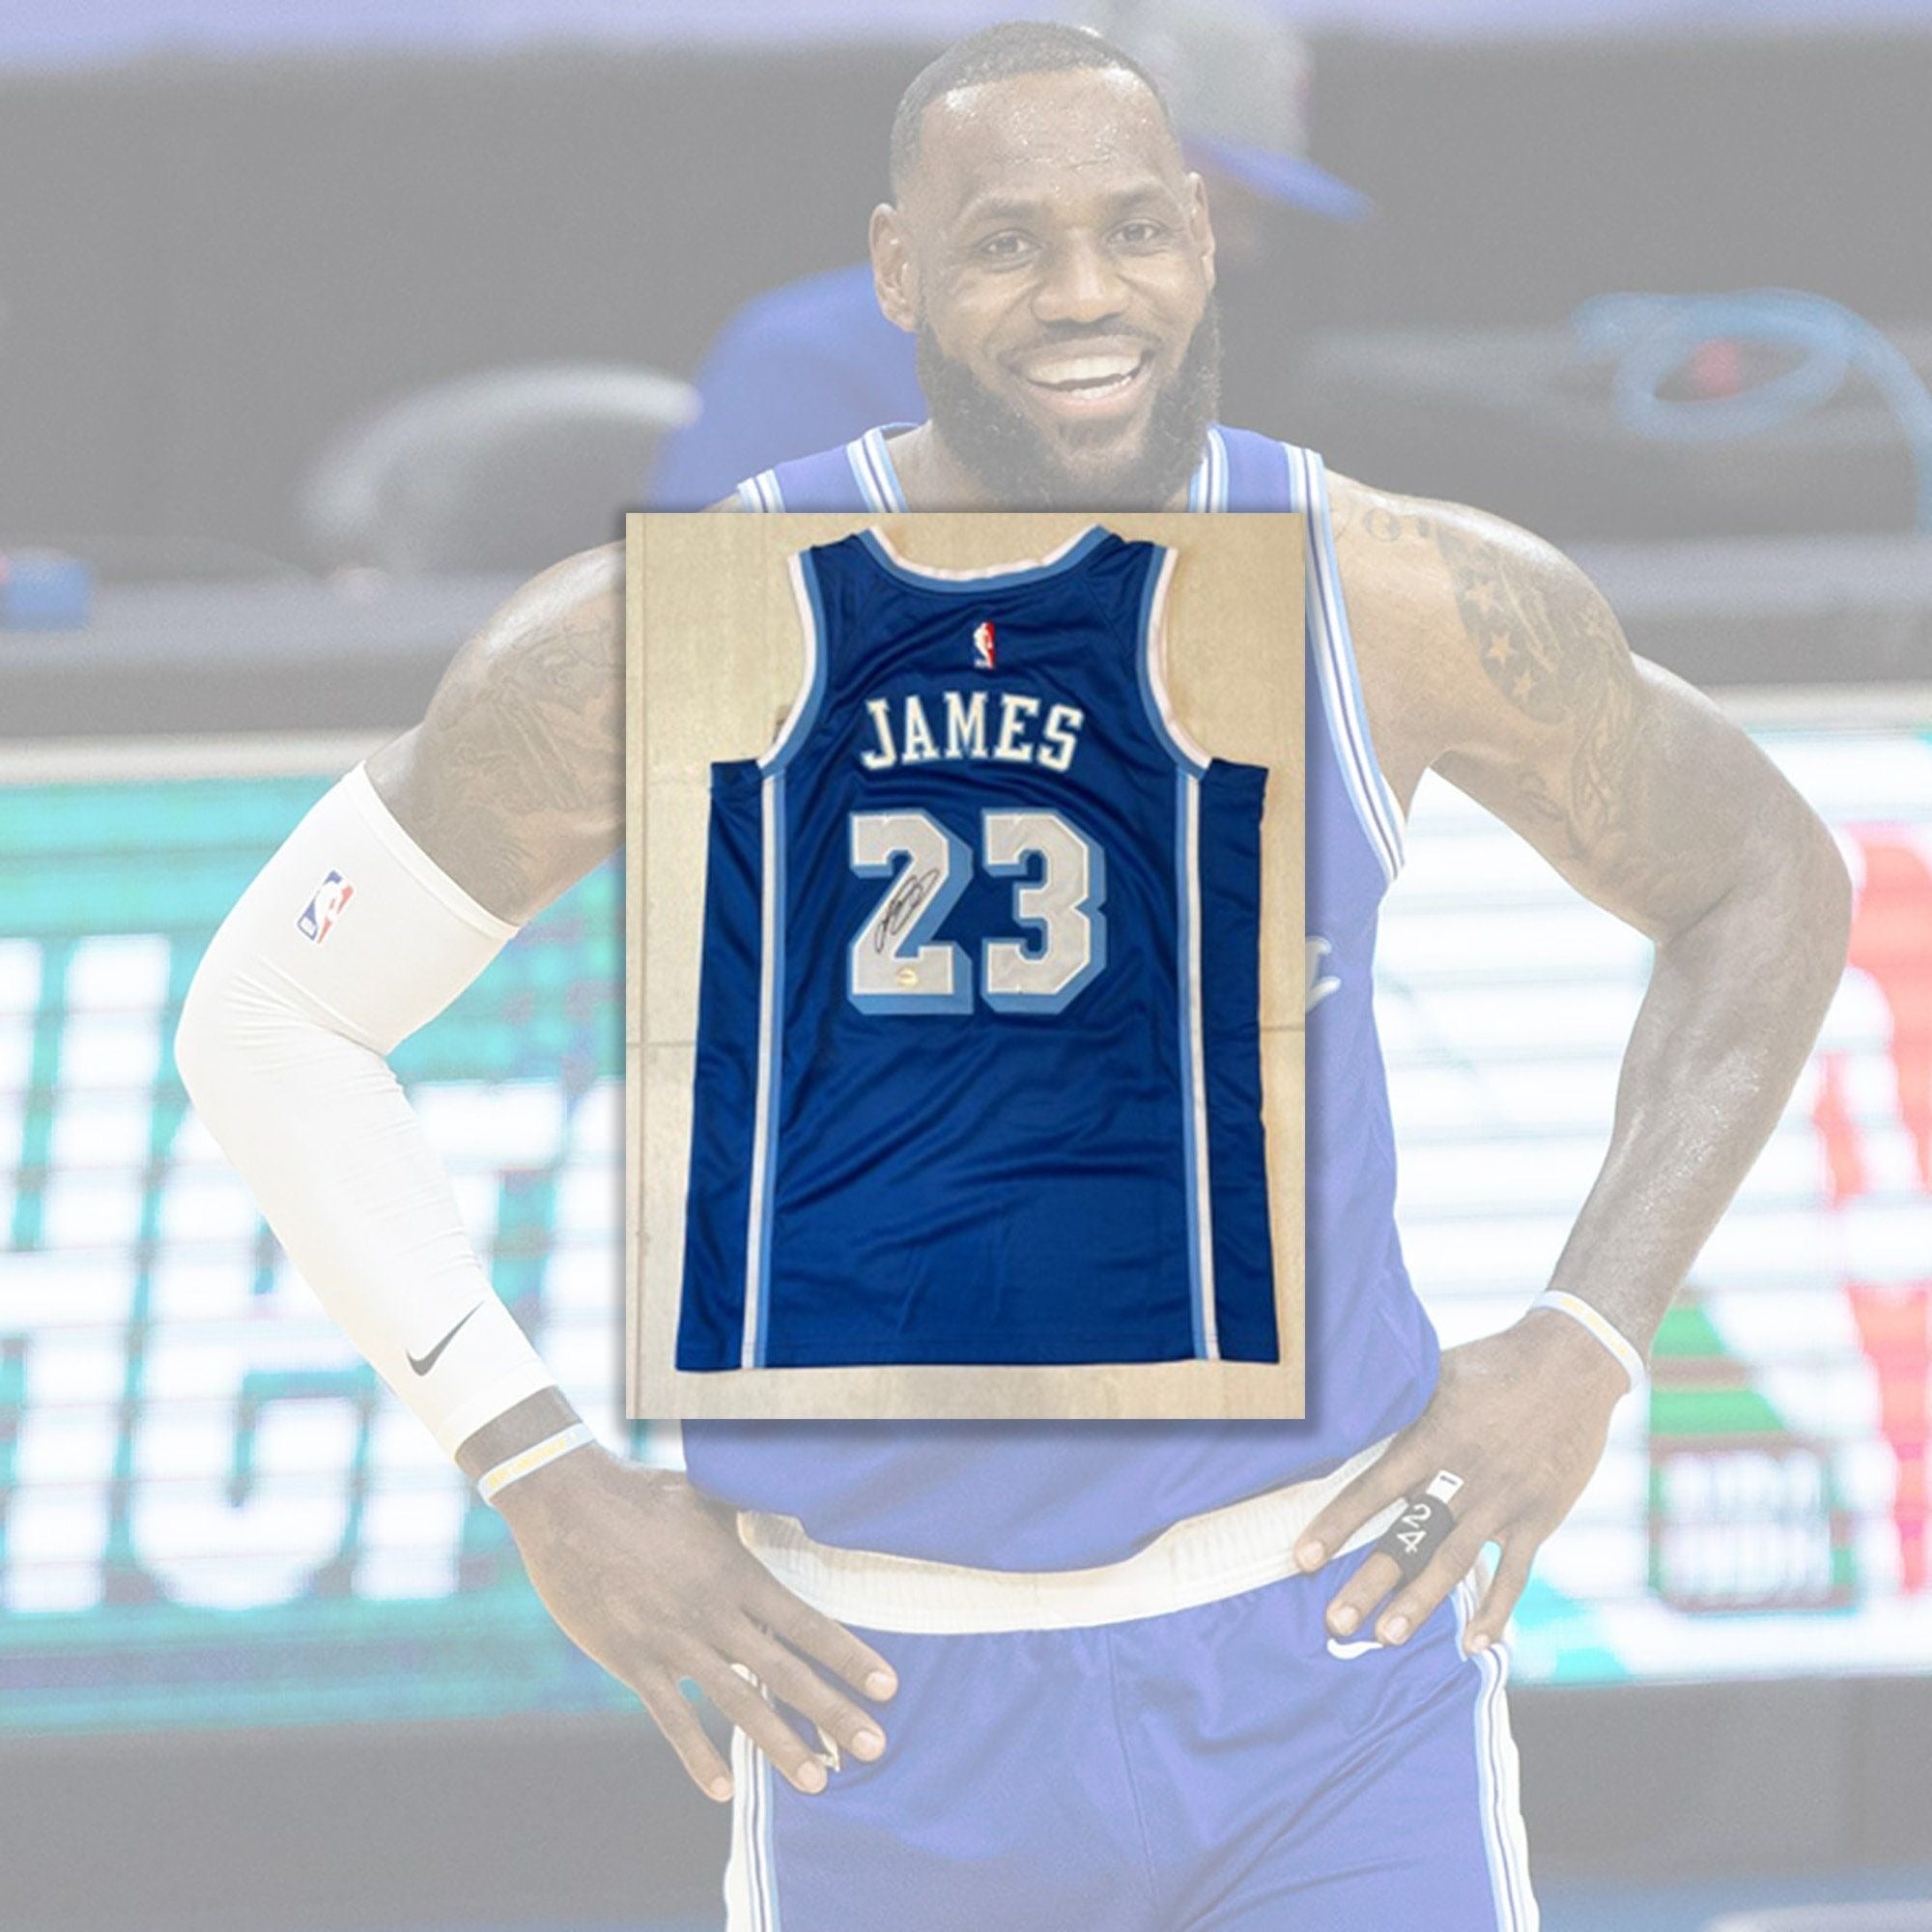 LeBron James jersey signed with proof